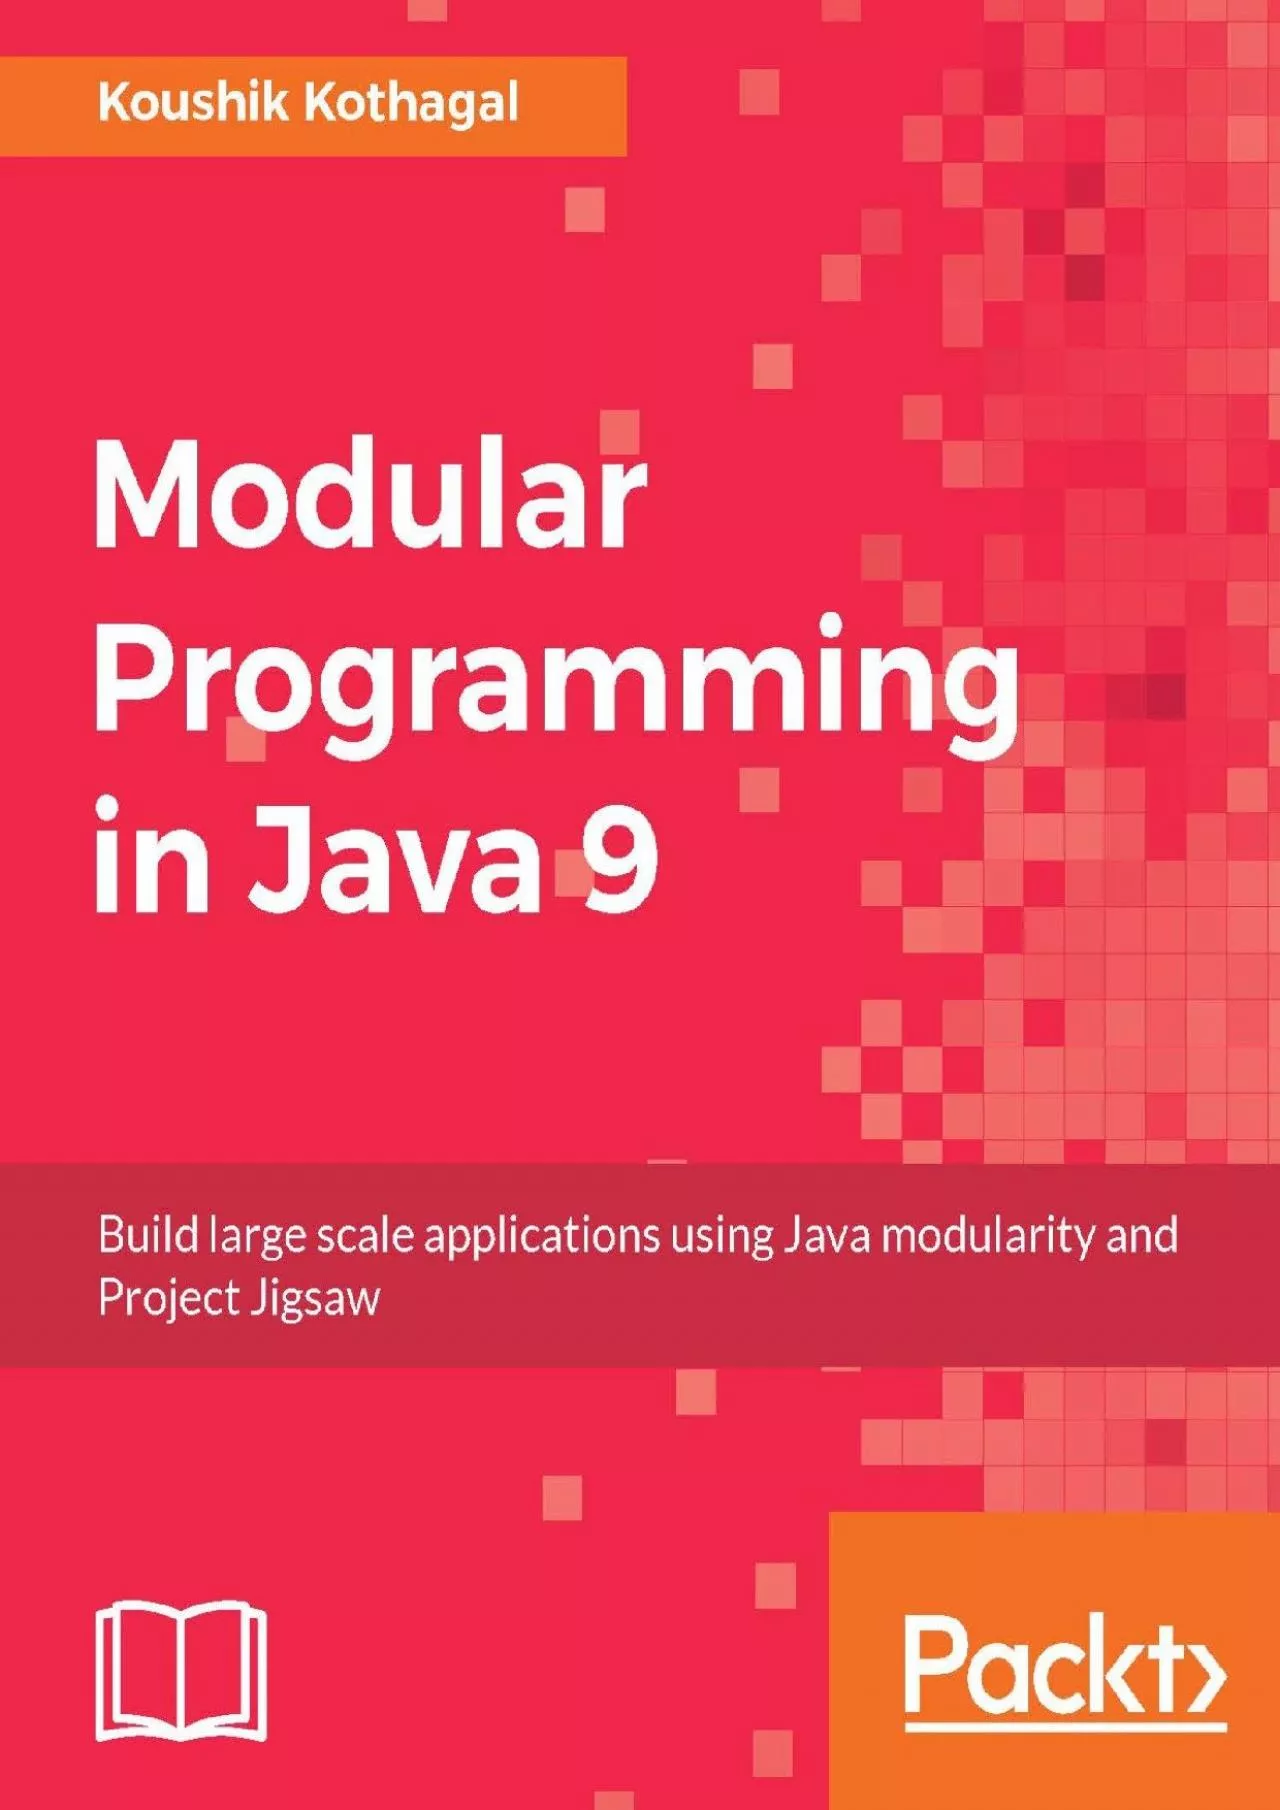 [READING BOOK]-Modular Programming in Java 9: Build large scale applications using Java